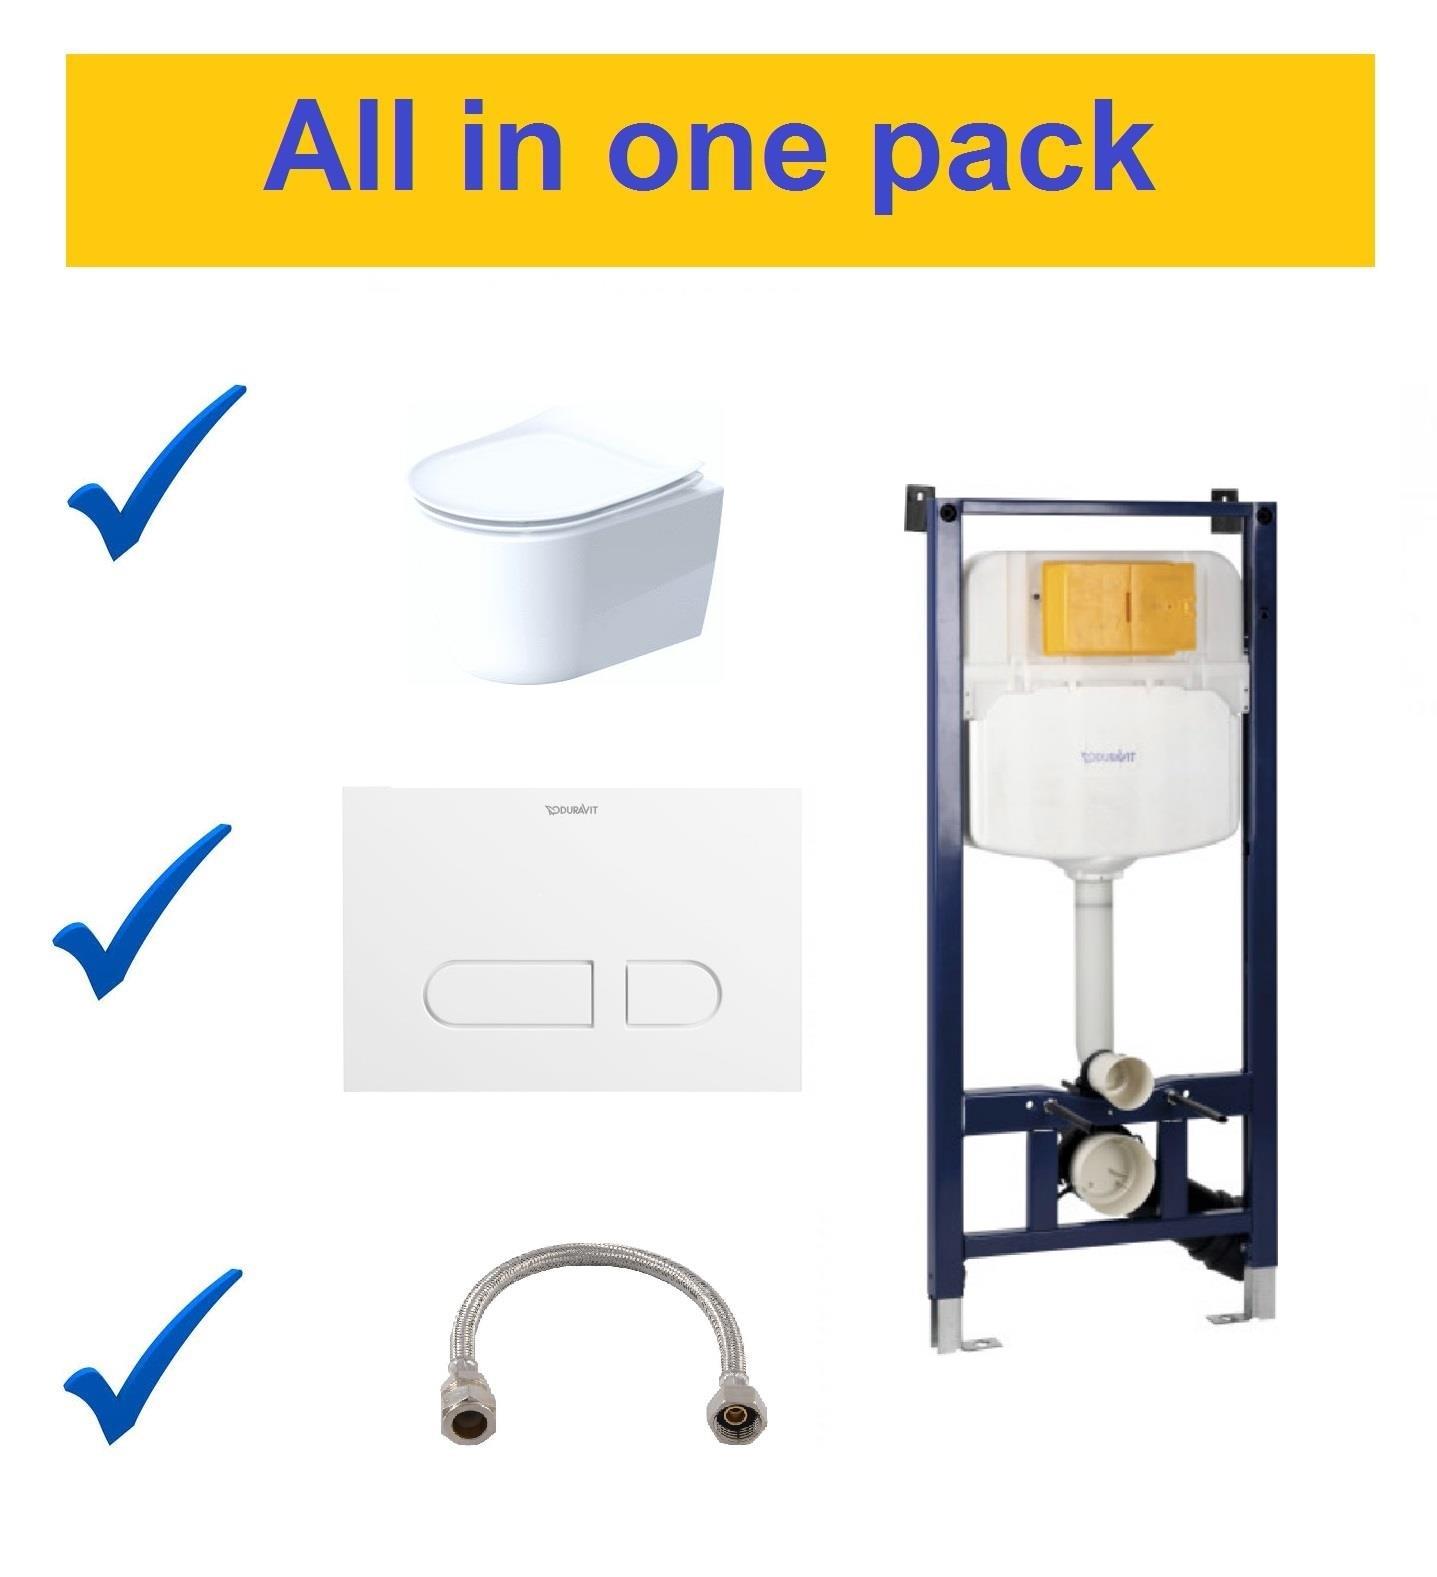 Duravit Soleil wandcloset all in one pack